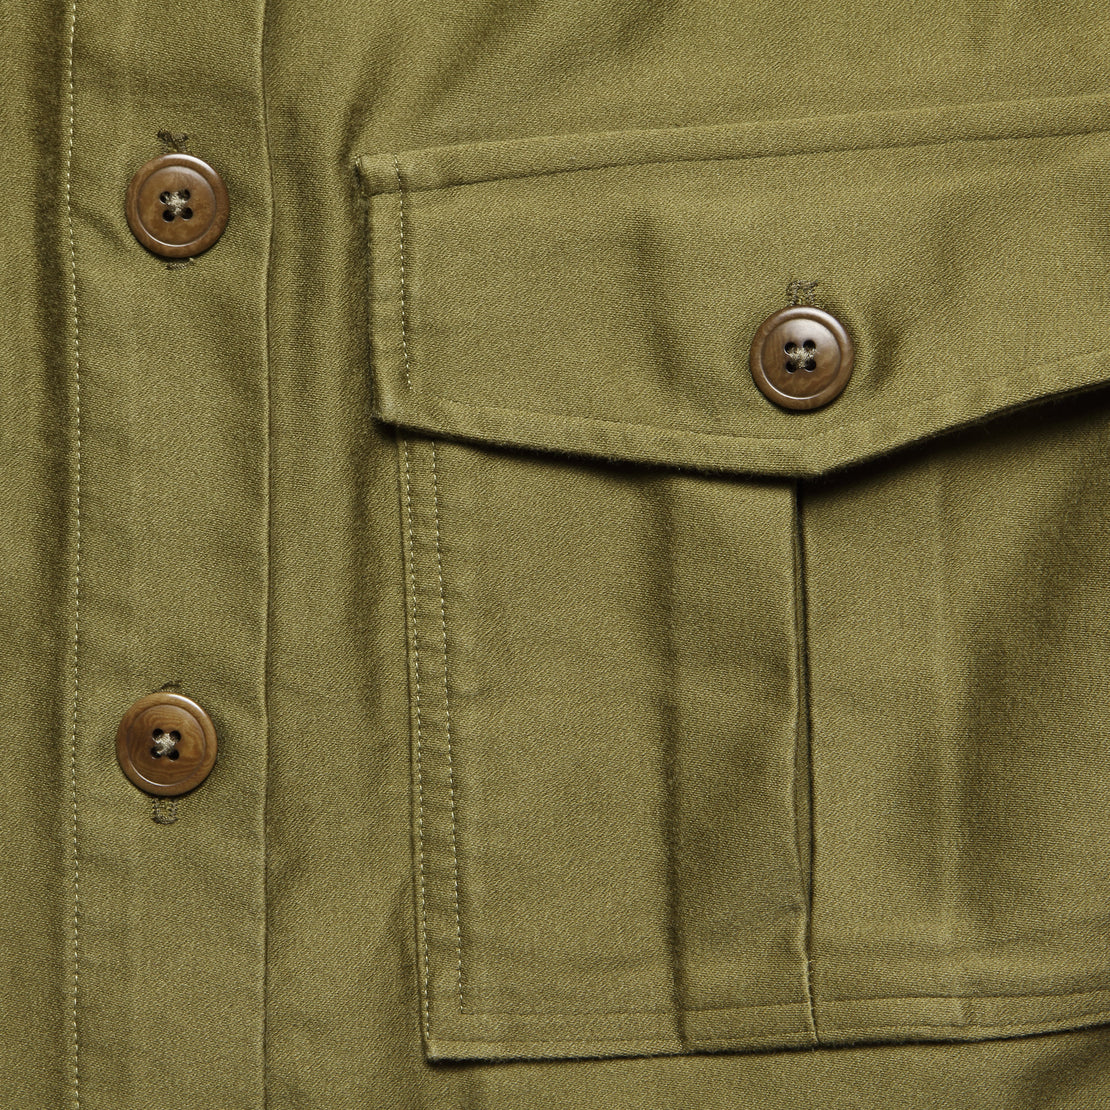 Mora Military Jacket - Olive Moleskin - Esby - STAG Provisions - W - Outerwear - Coat/Jacket